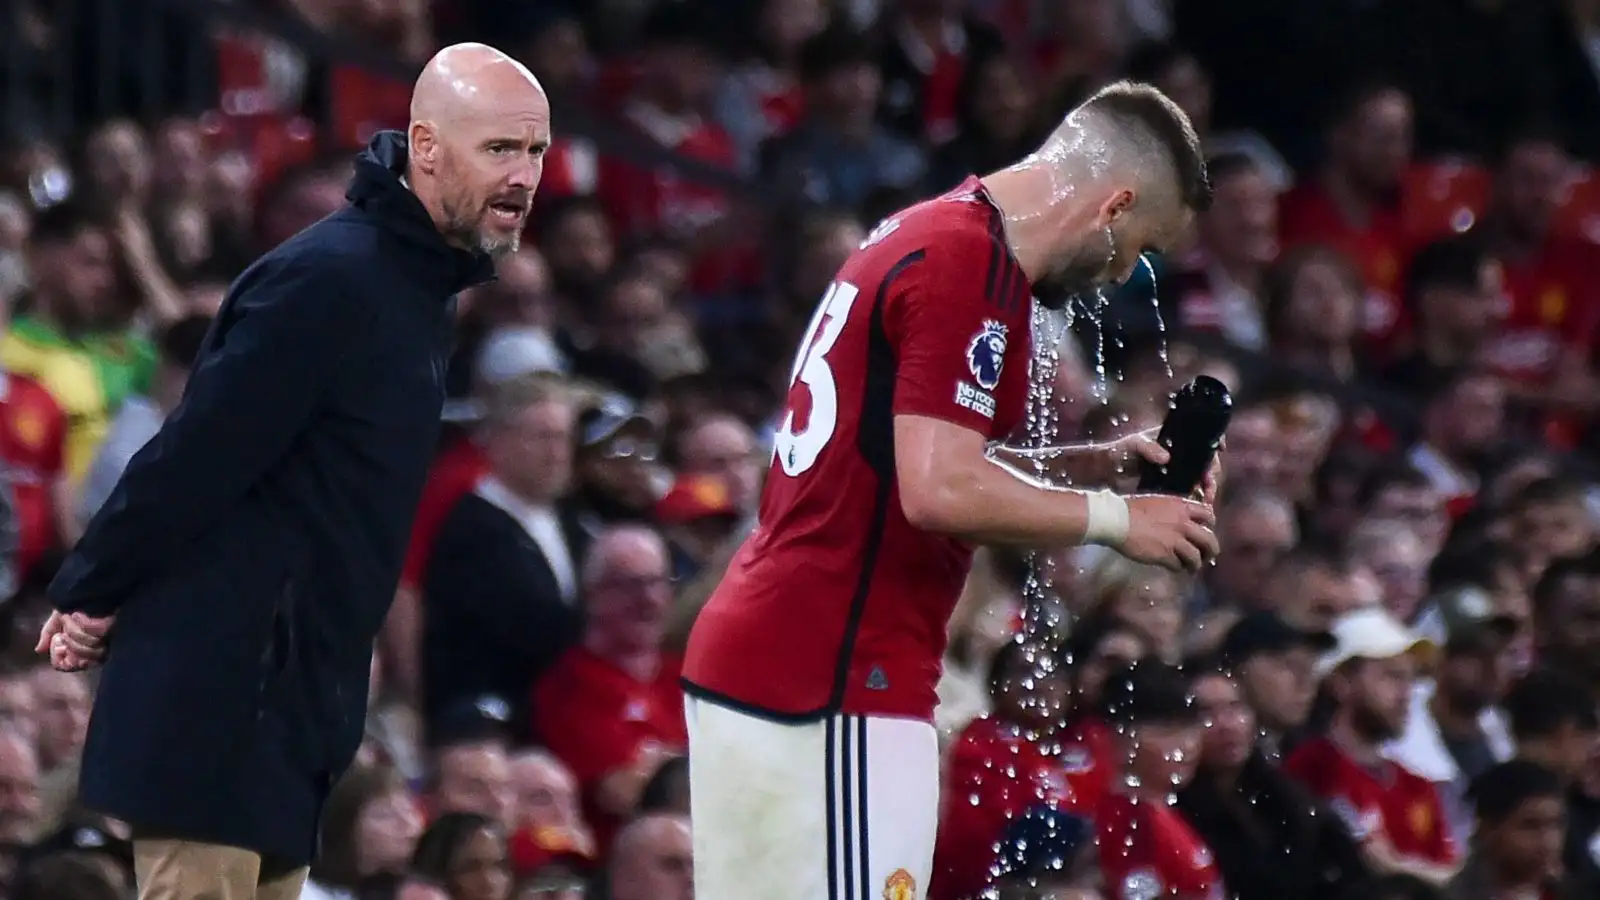 Manchester United manager Erik ten Hag gives instructions to a drenched Luke Shaw.